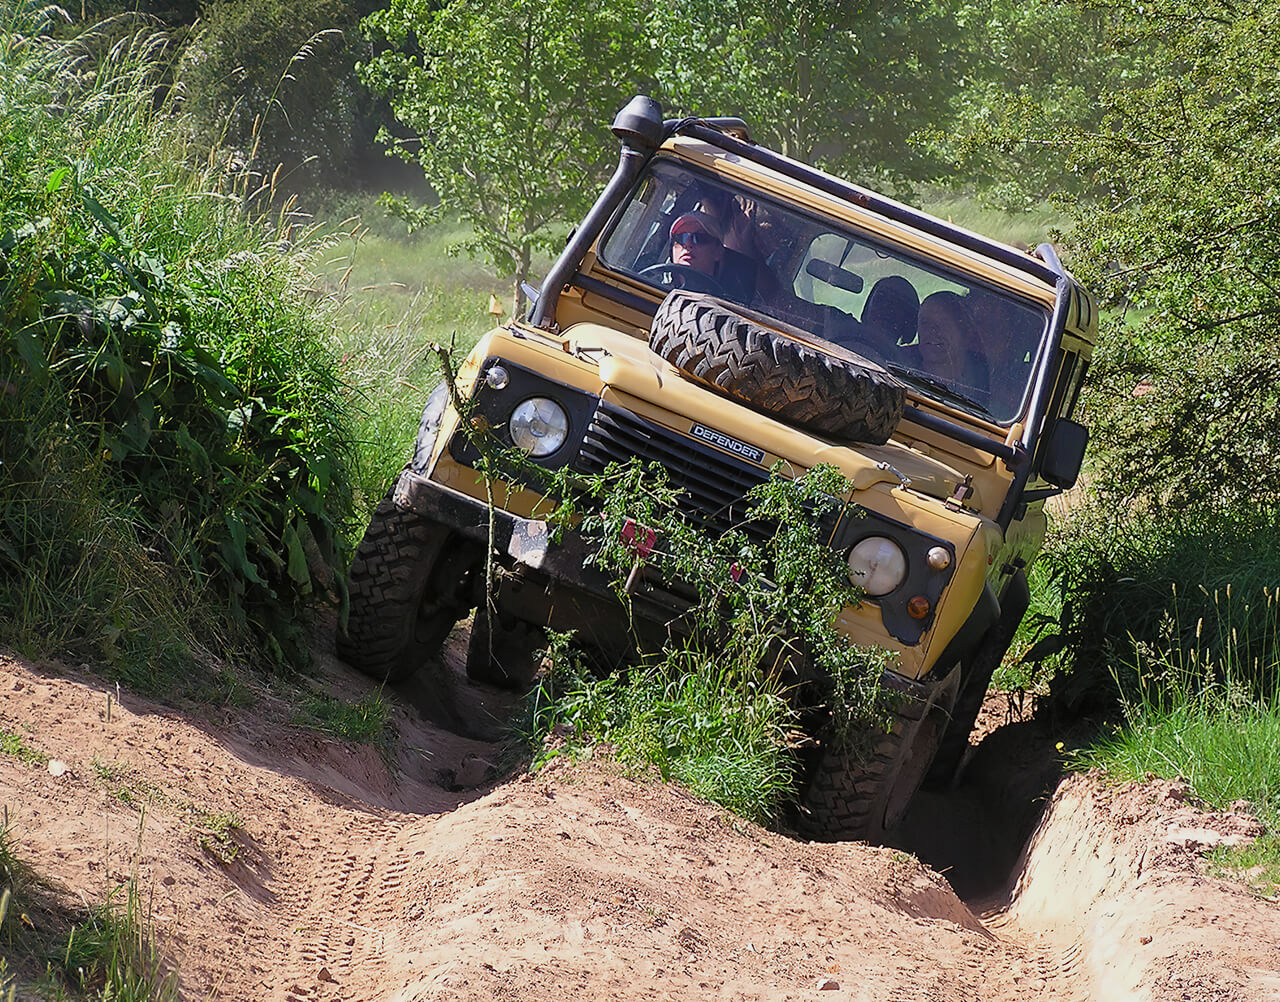 A Land Rover Defender going up rough terrain